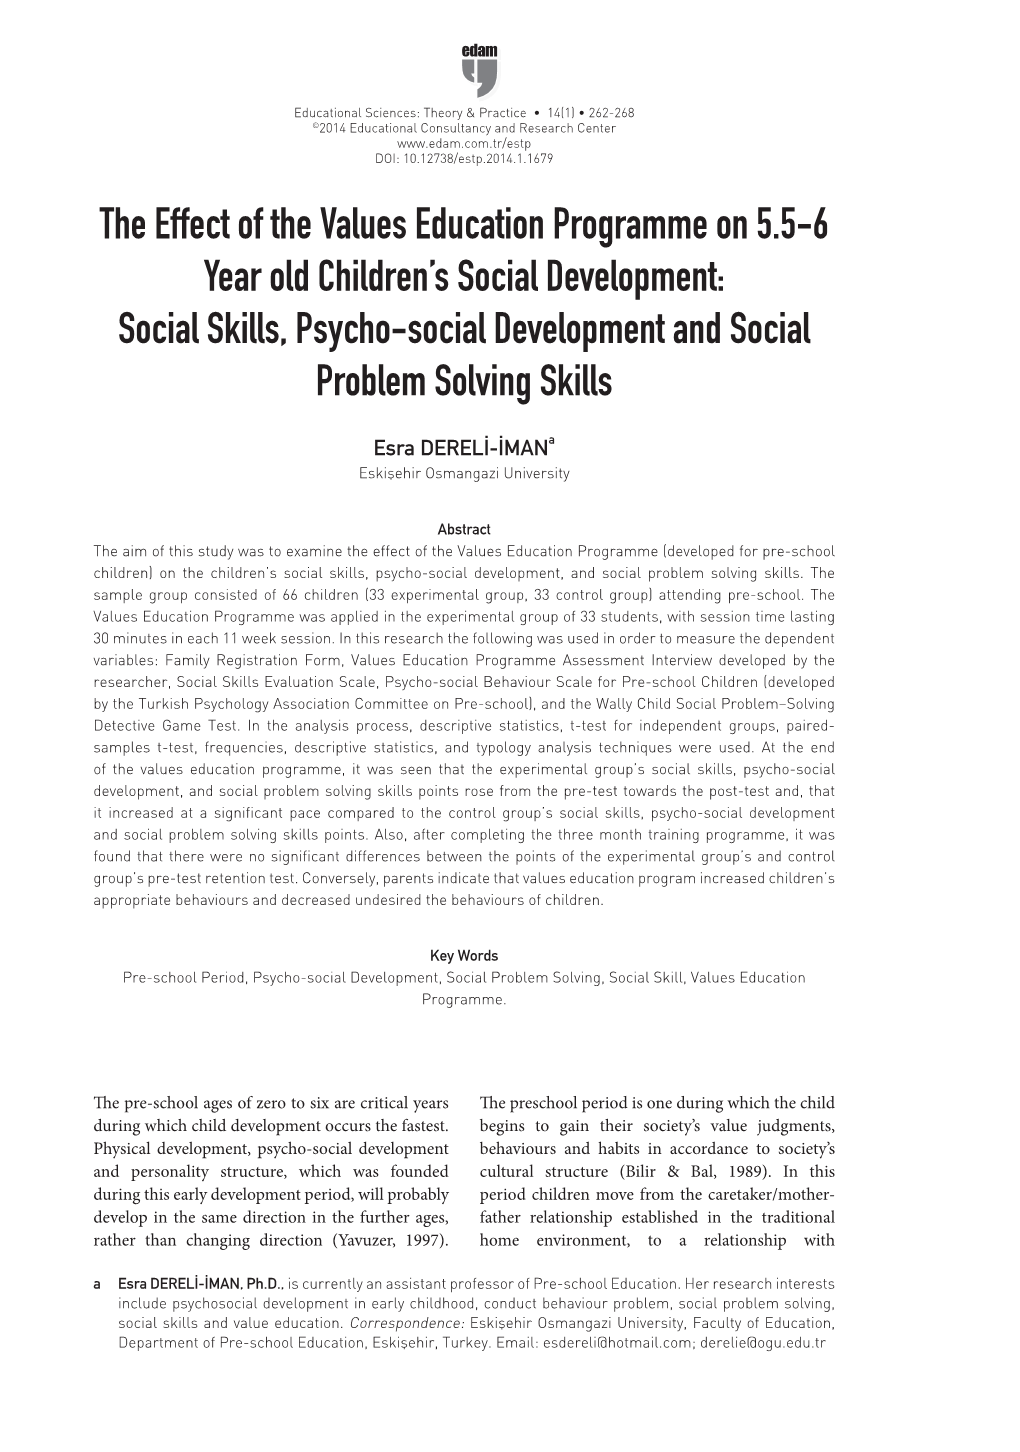 The Effect of the Values Education Programme on 5.5-6 Year Old Children's Social Development